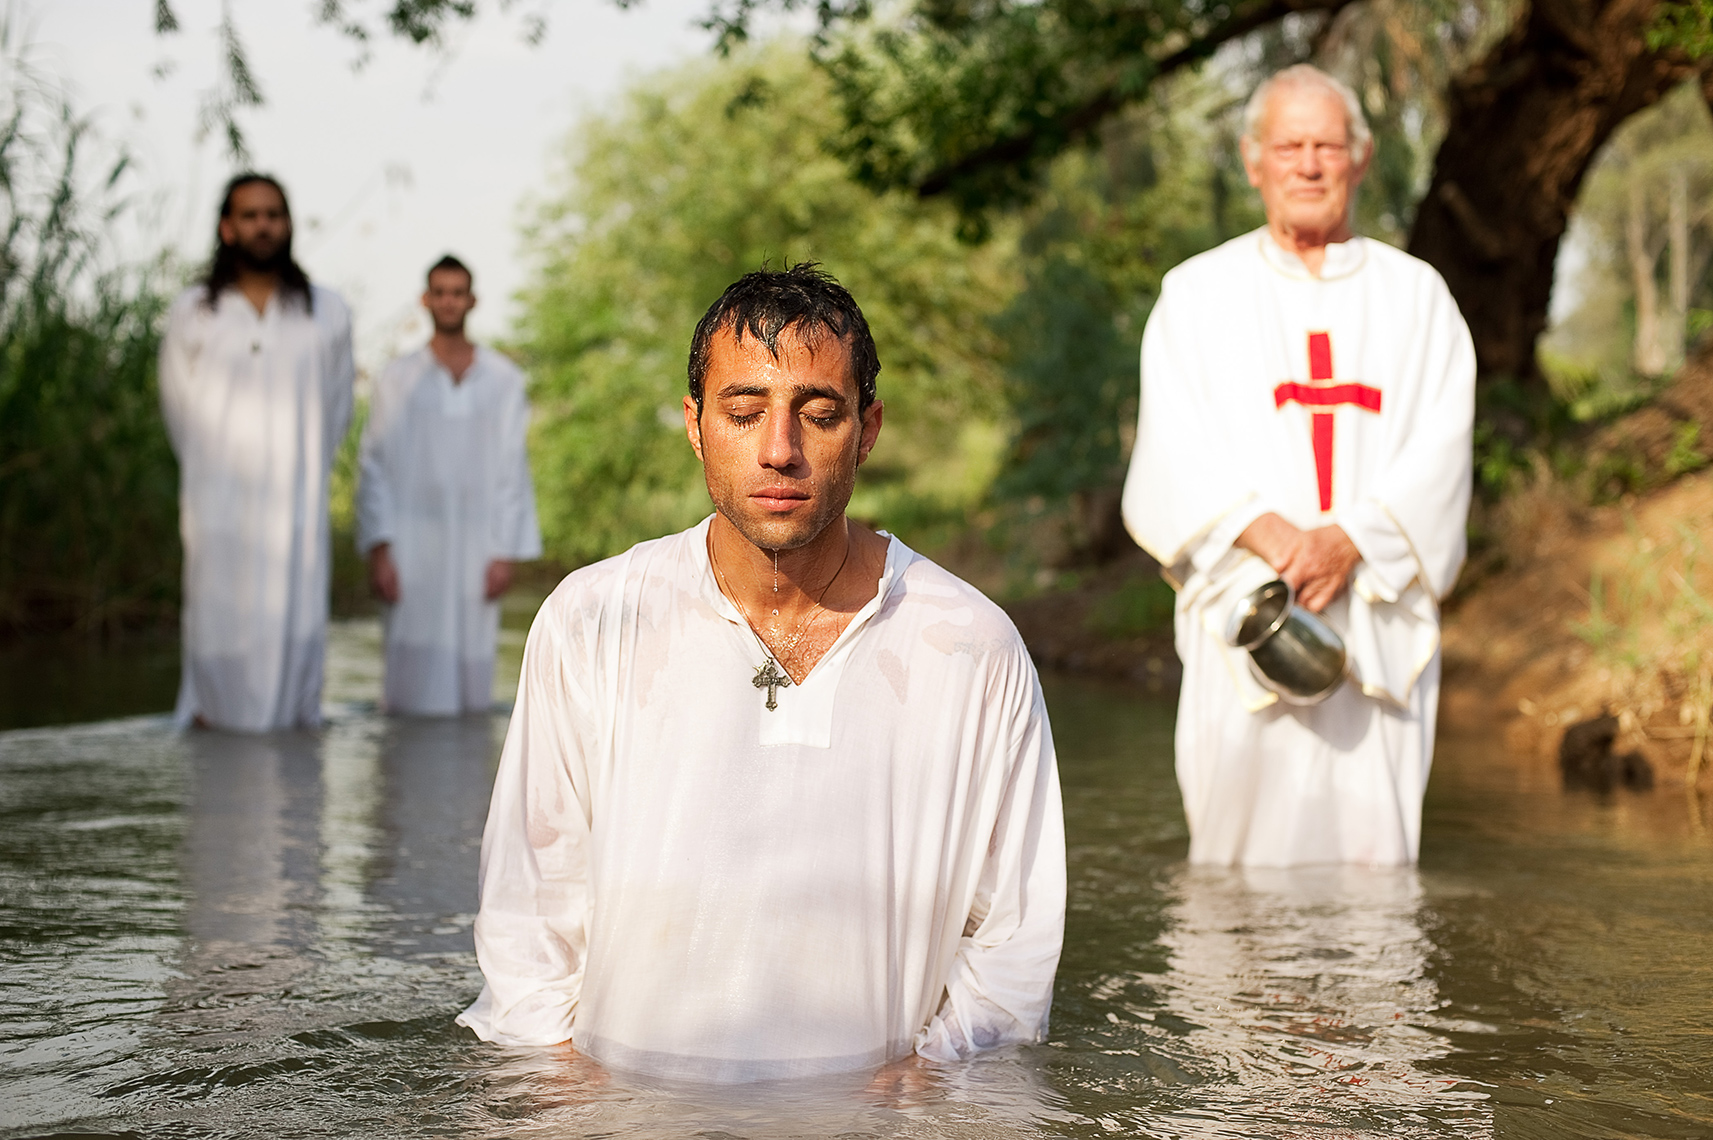 Baptism ceremony in a tributary of the River Jordan, Golan Heights, Israel